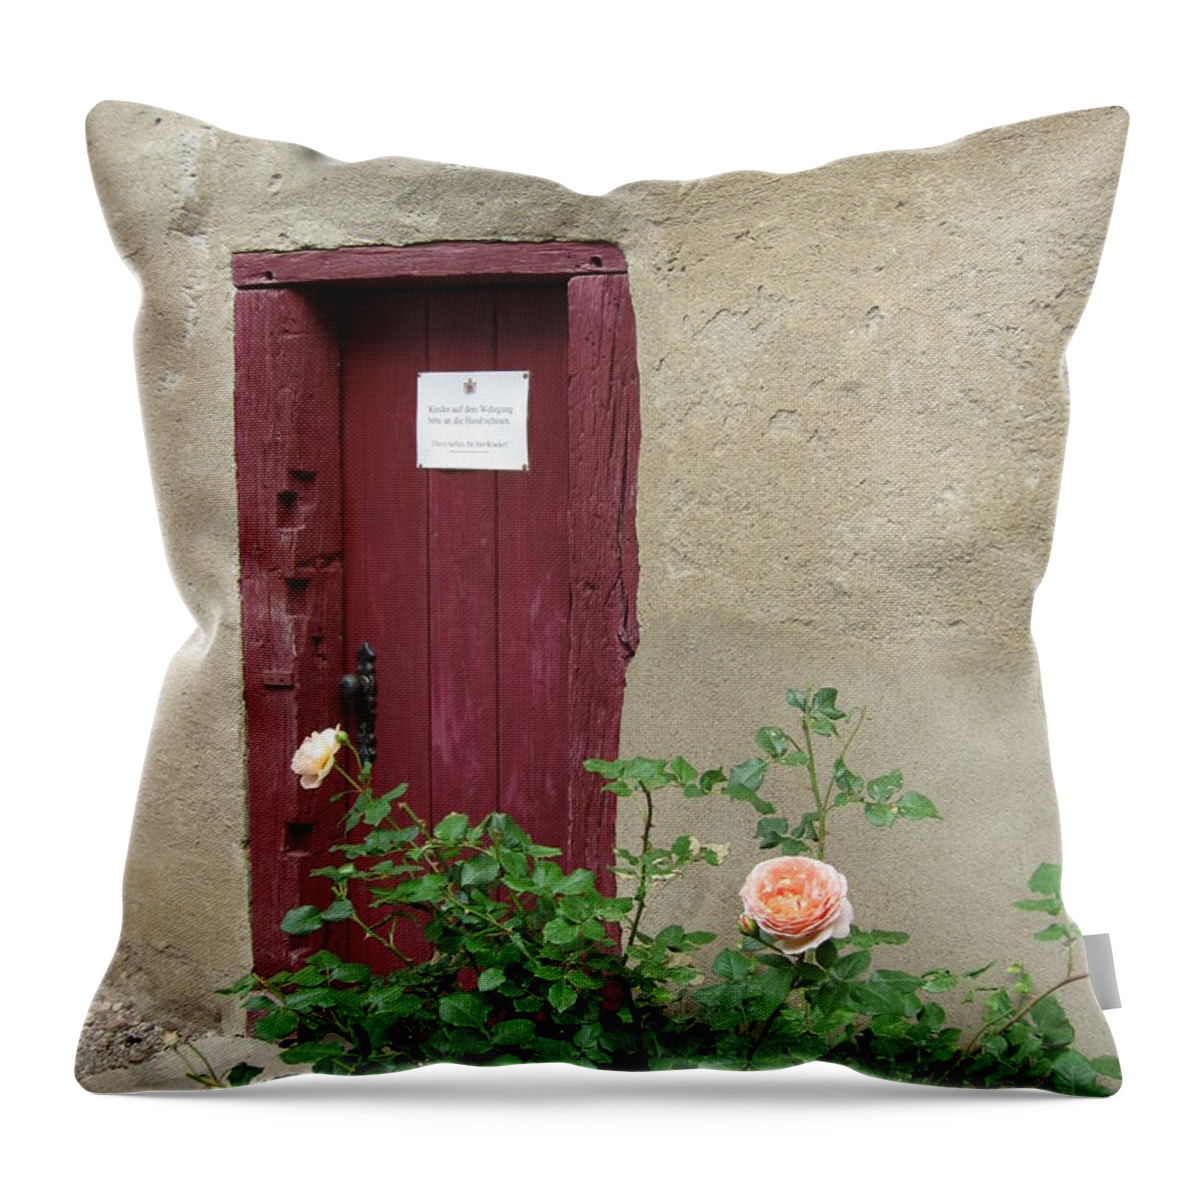 Door Throw Pillow featuring the photograph The Doorway by Pema Hou